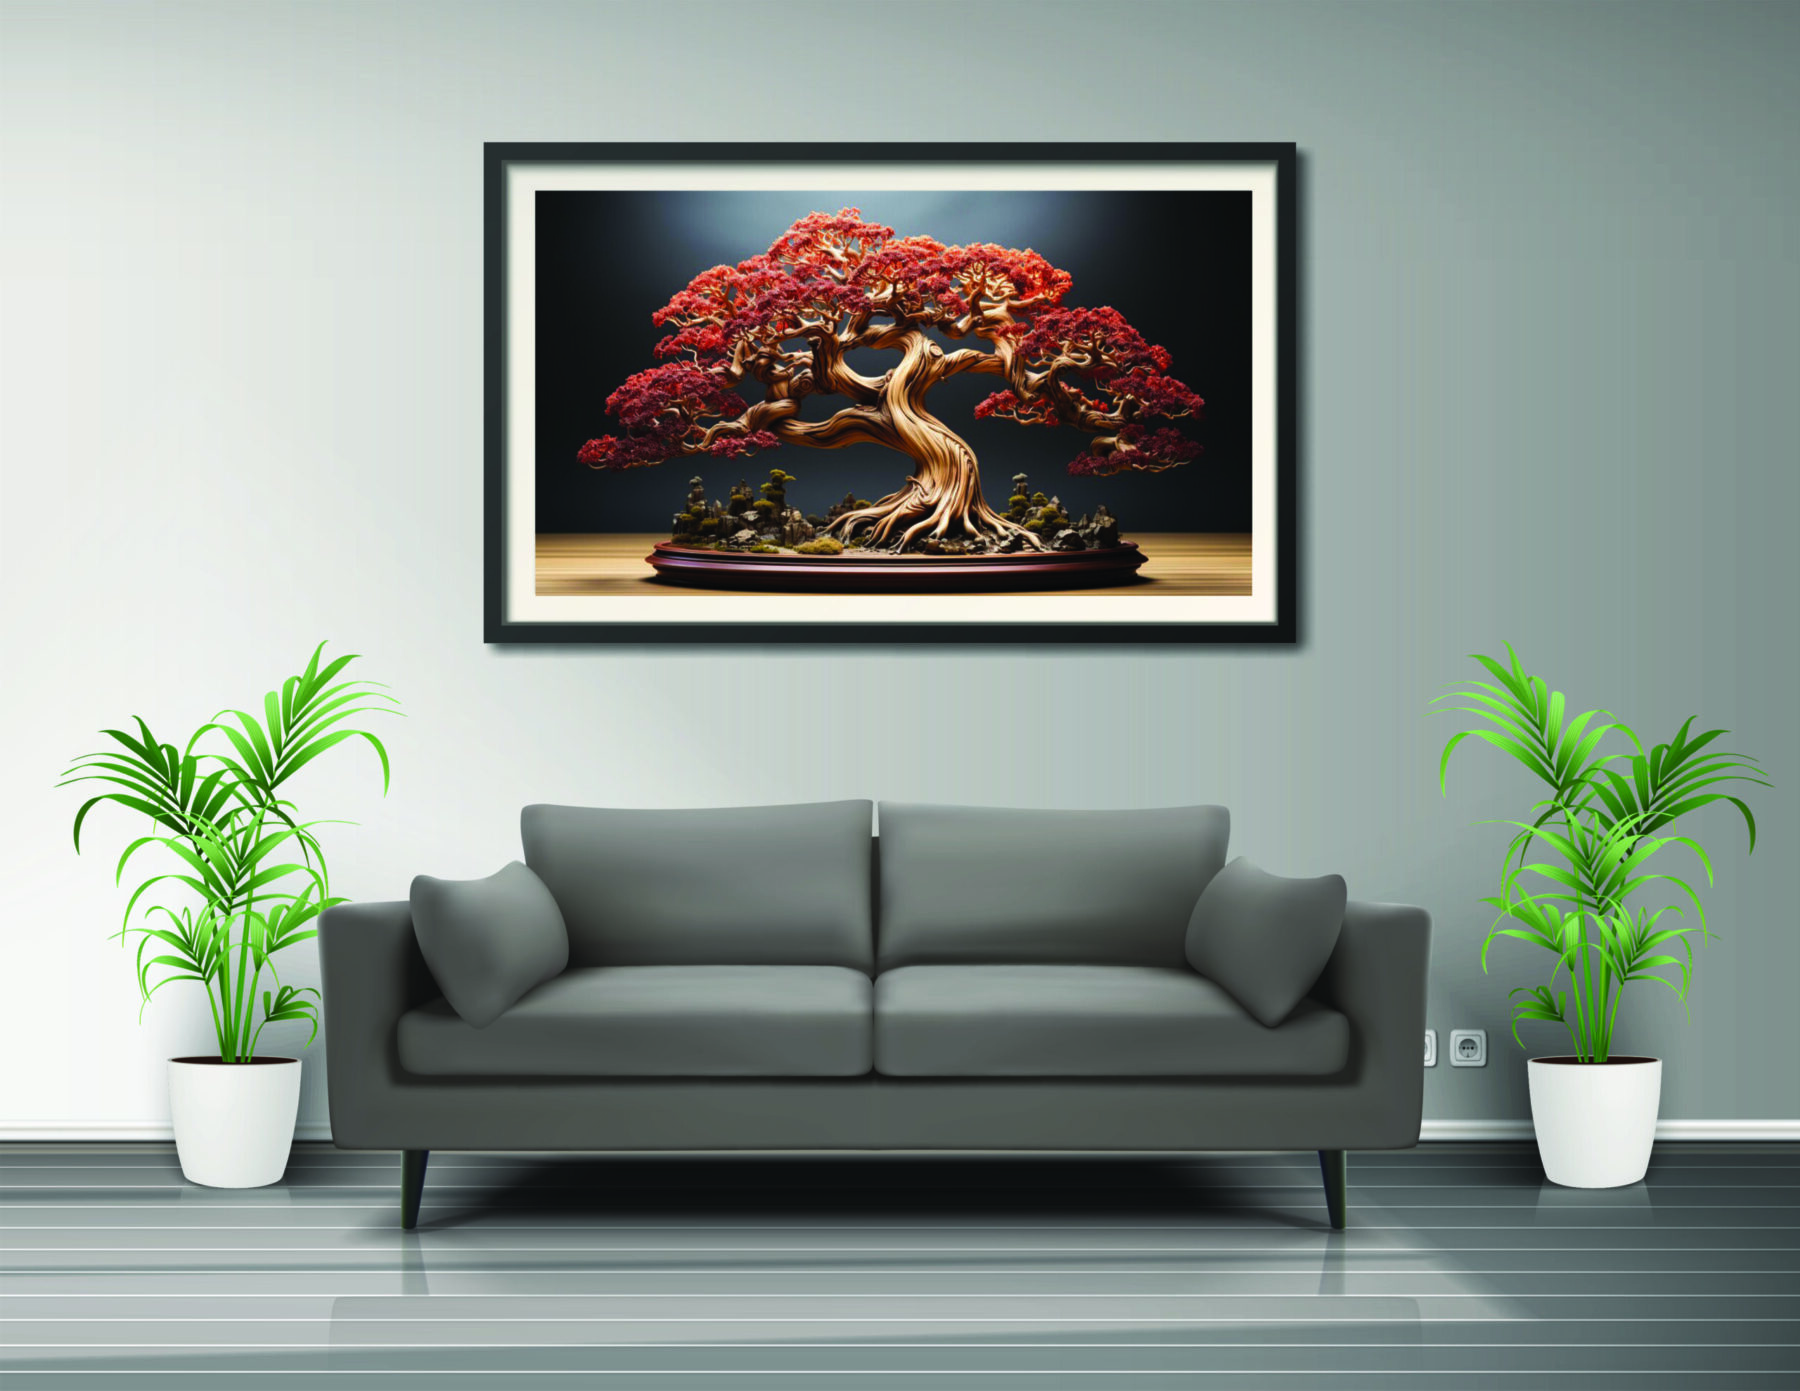 Tree paintings canvas wall art large size for living room decor. Large painting for wall. (36 Inch x 24Inch, )